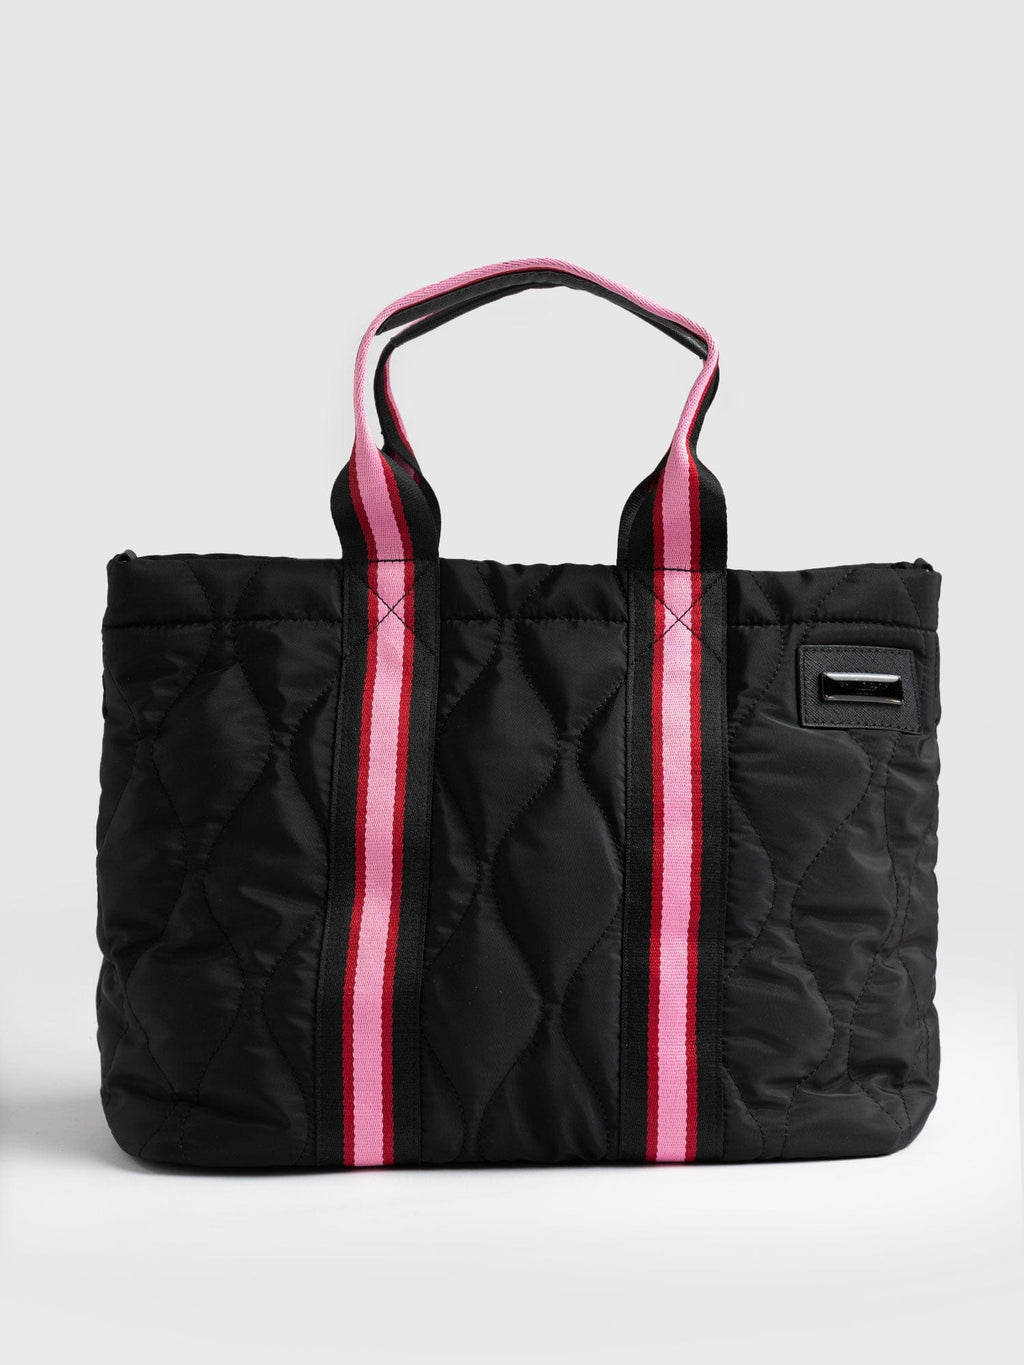 Quilted Tote Bag Black/Pink - Women's Tote Bags